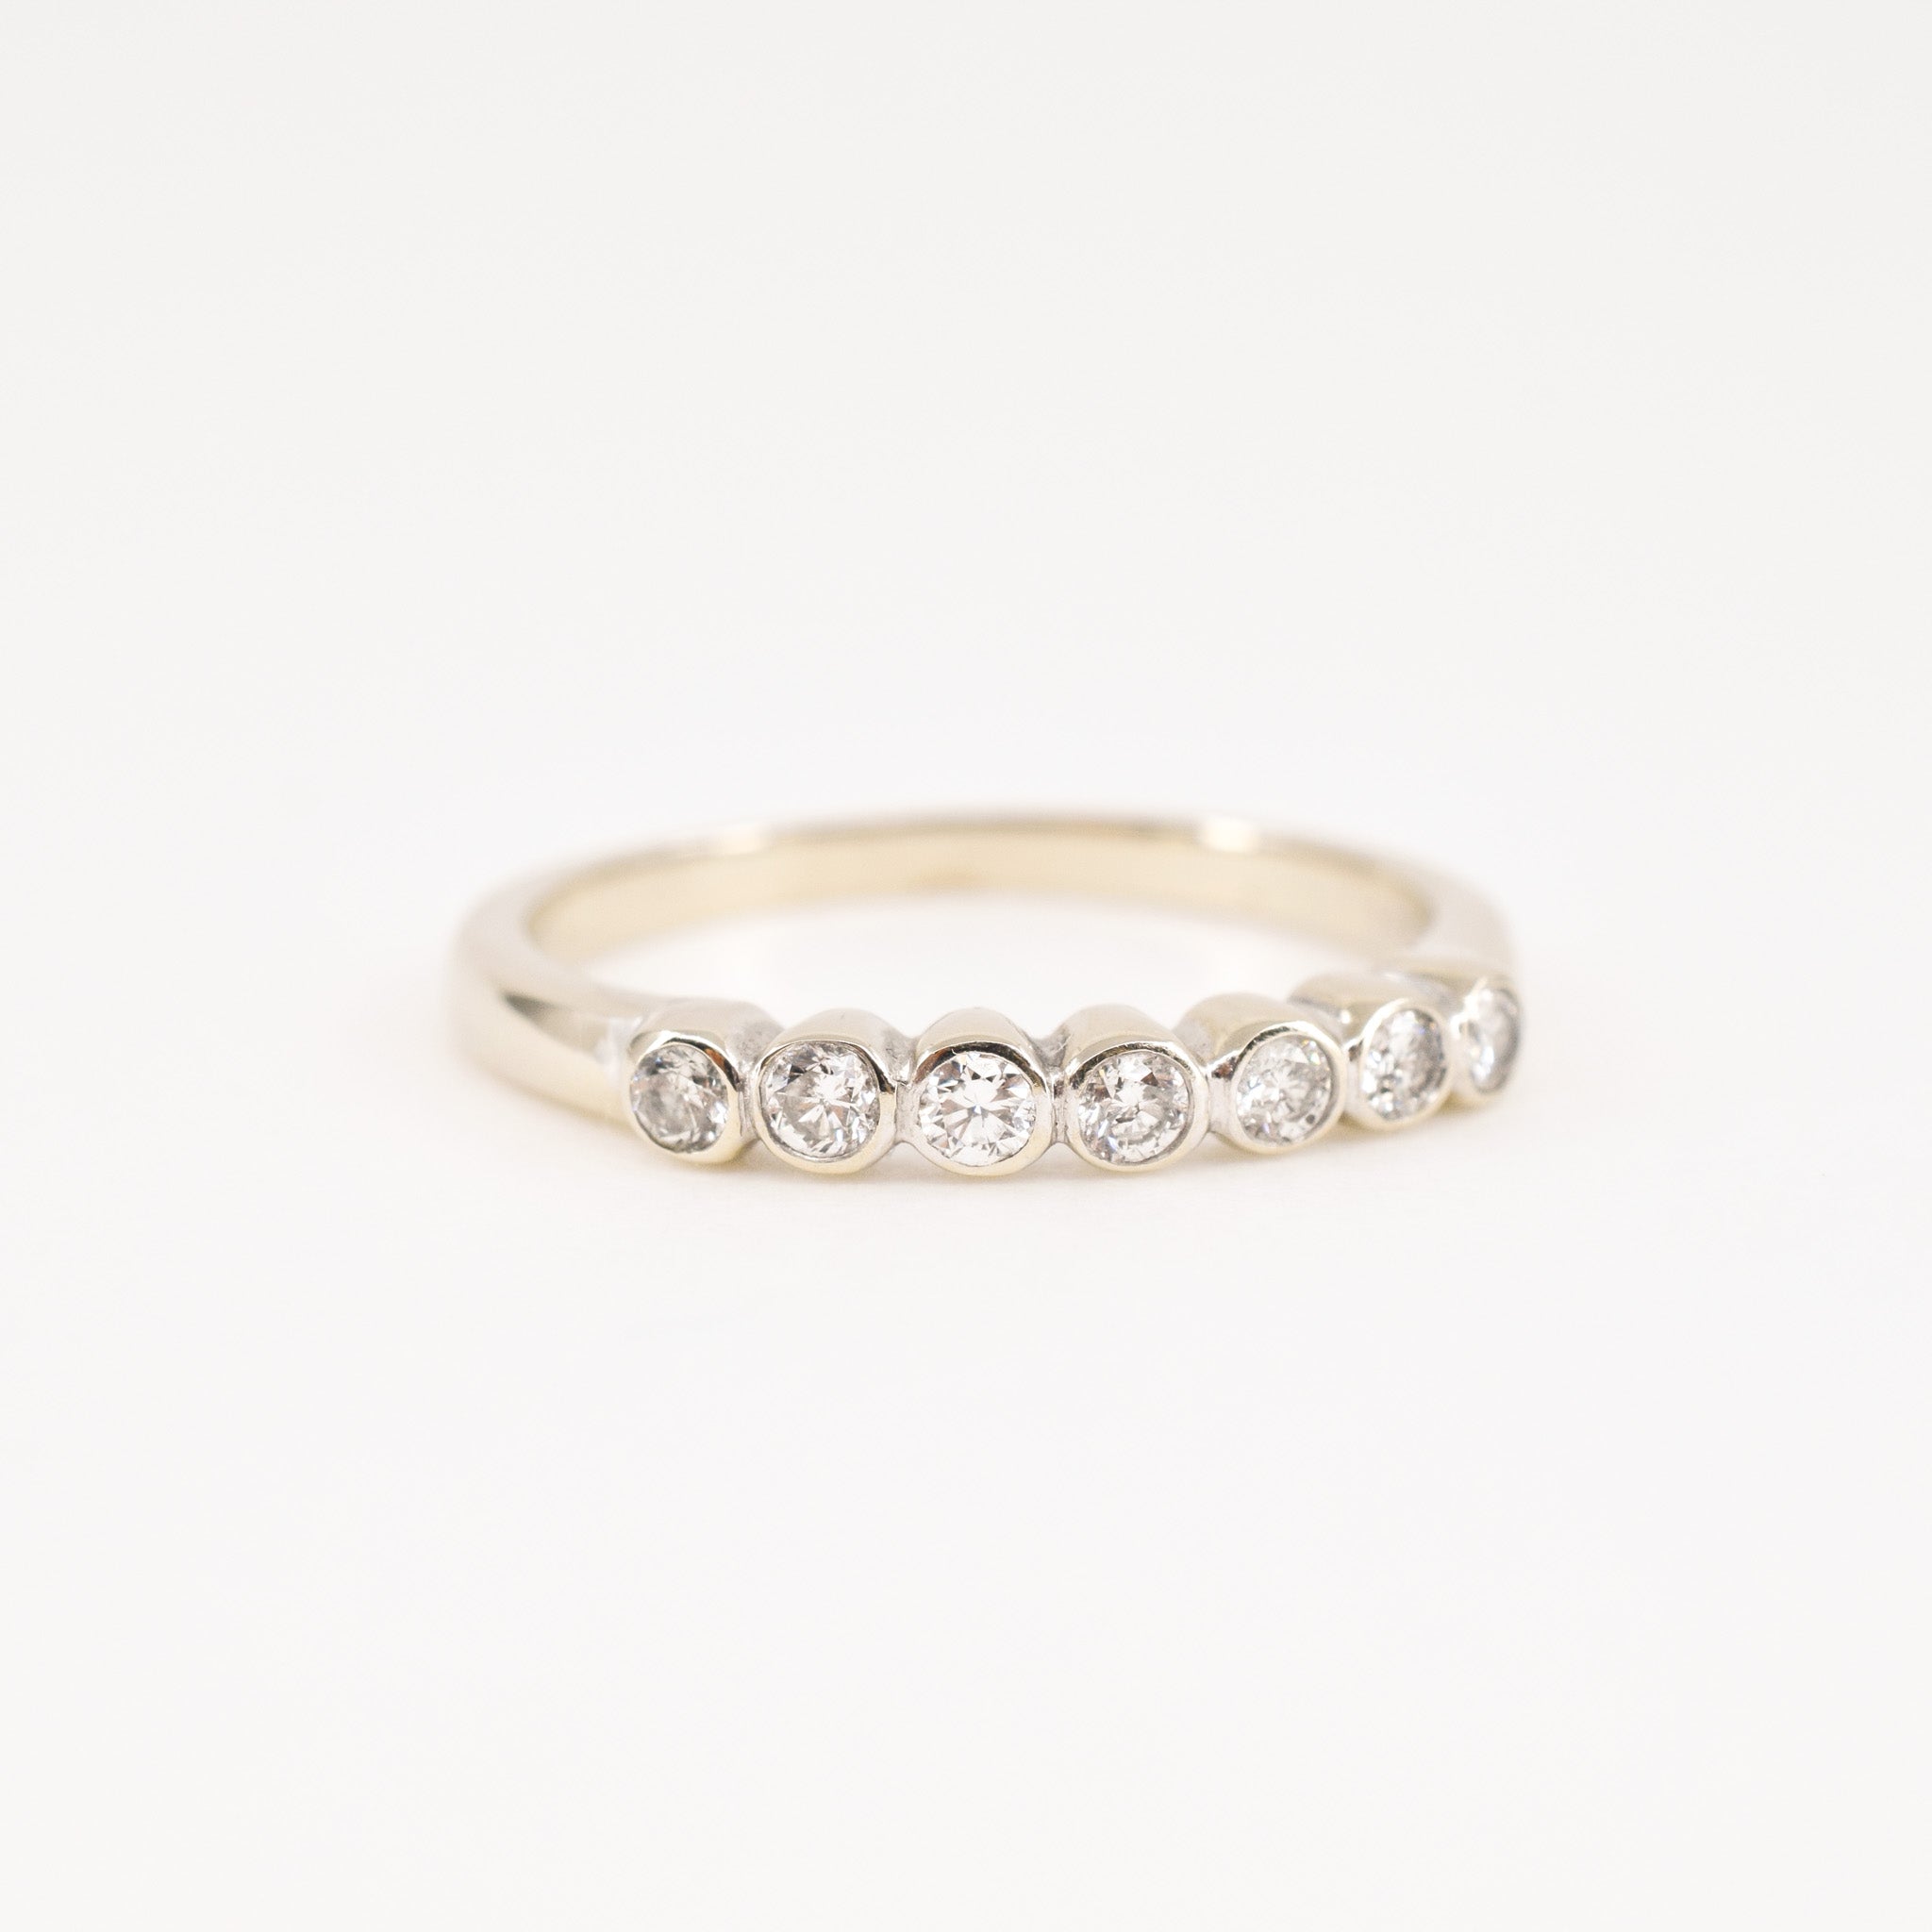 vintage white gold stacking ring, folklor vintage jewelry canada